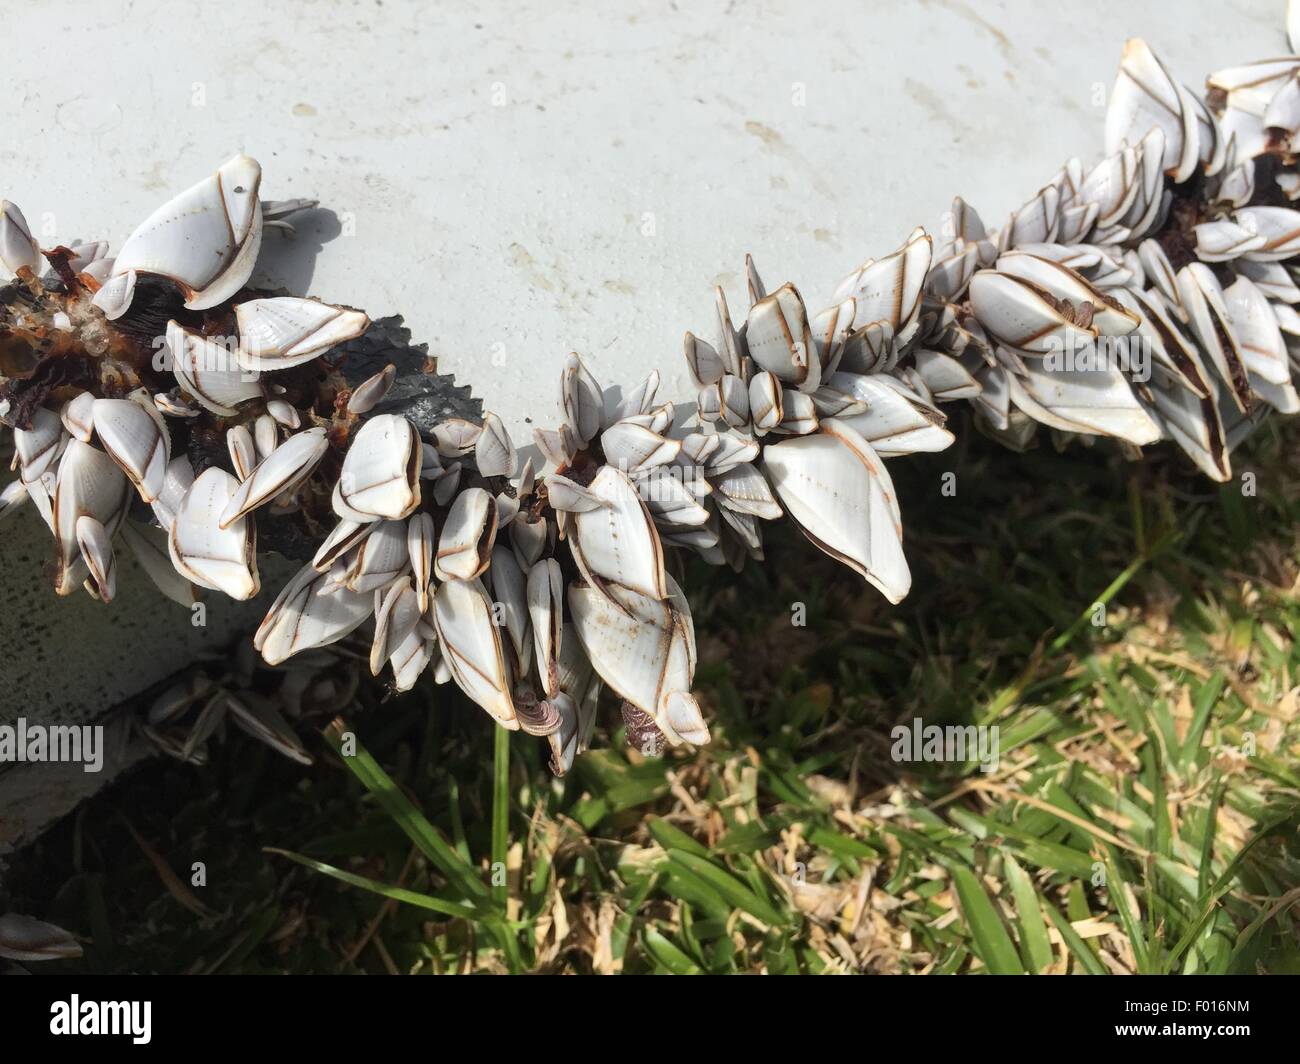 The Reunion Island. 29th July, 2015. Photo taken on Jul.29, 2015, shows shells growing on a piece of debris on Reunion Island. Verification had confirmed that the debris discovered on Reunion Island belongs to missing Malaysian Airlines flight MH370, Malaysian Prime Minister Najib Razak announced early Thursday. © Romain Latournerie/Xinhua/Alamy Live News Stock Photo